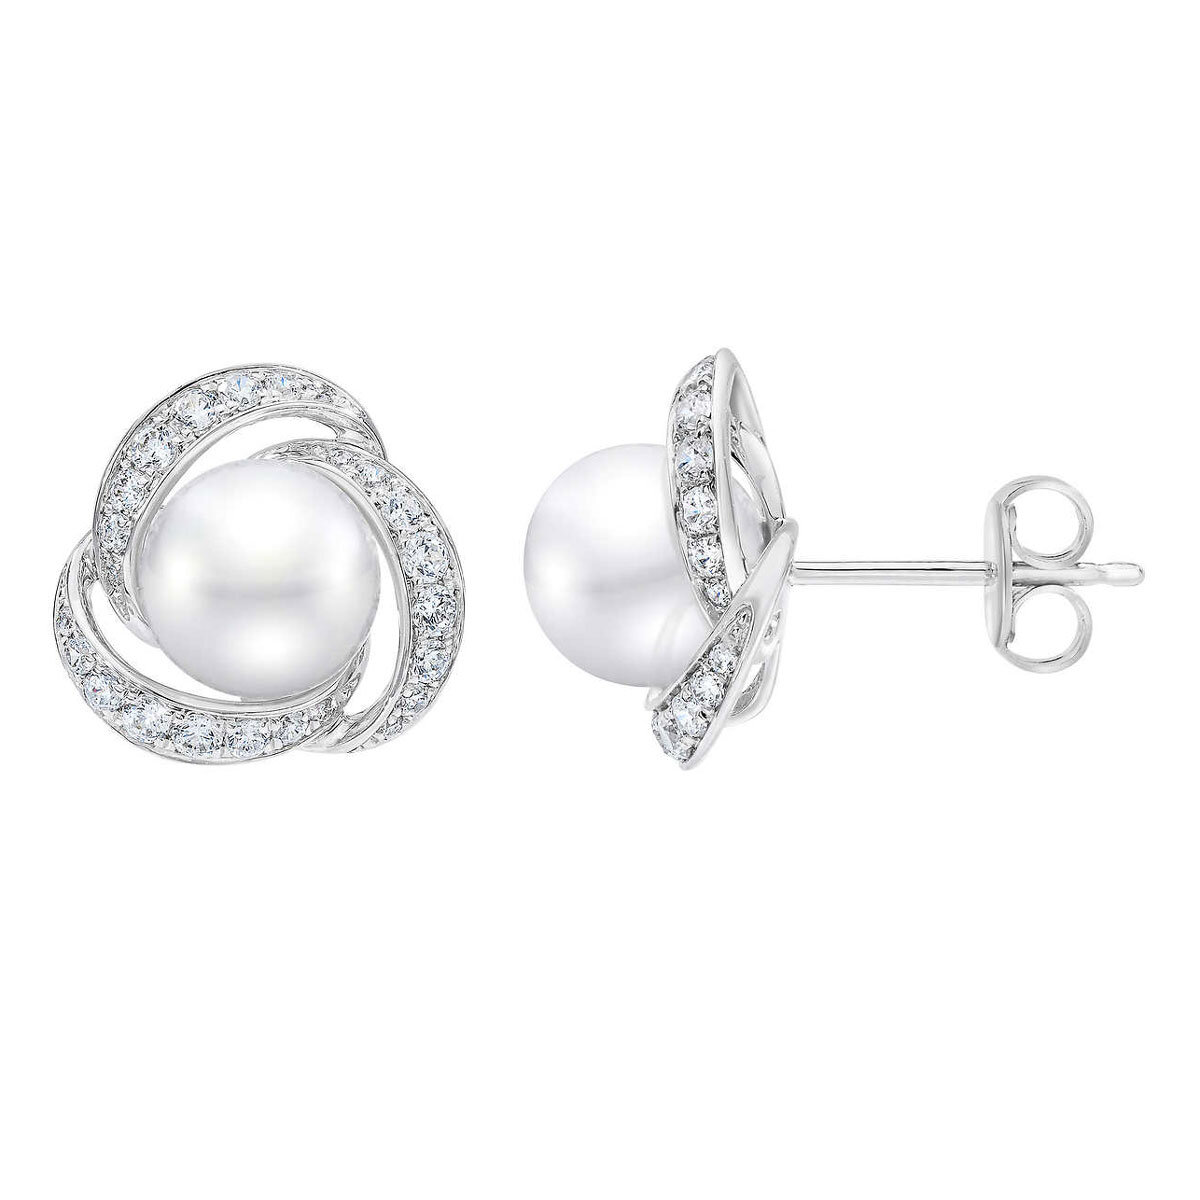 7.5-8mm Cultured Freshwater White Pearl & 0.50ctw Diamond Earrings, 14ct White Gold